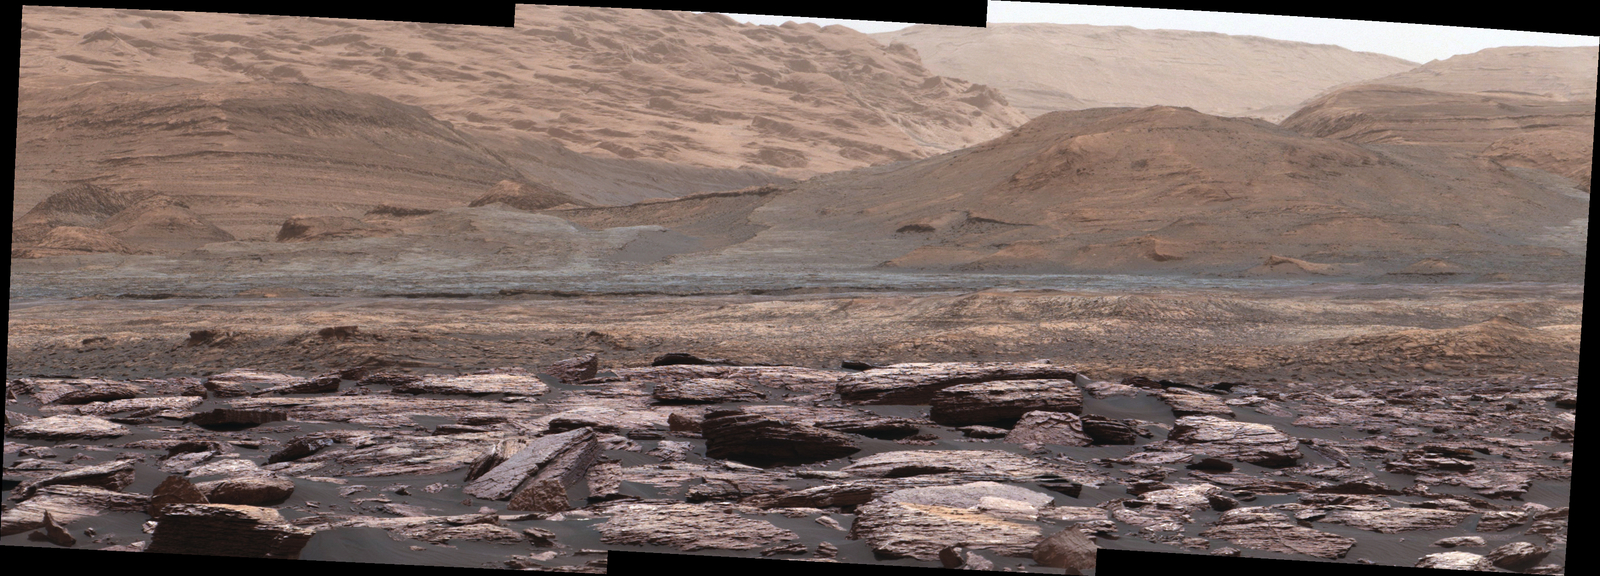 The foreground of this scene from the Mastcam on NASA's Curiosity Mars rover shows purple-hued rocks near the rover's late-2016 location. The middle distance includes future destinations for the rover. Variations in color of the rocks hint at the diversity of their composition on lower Mount Sharp.